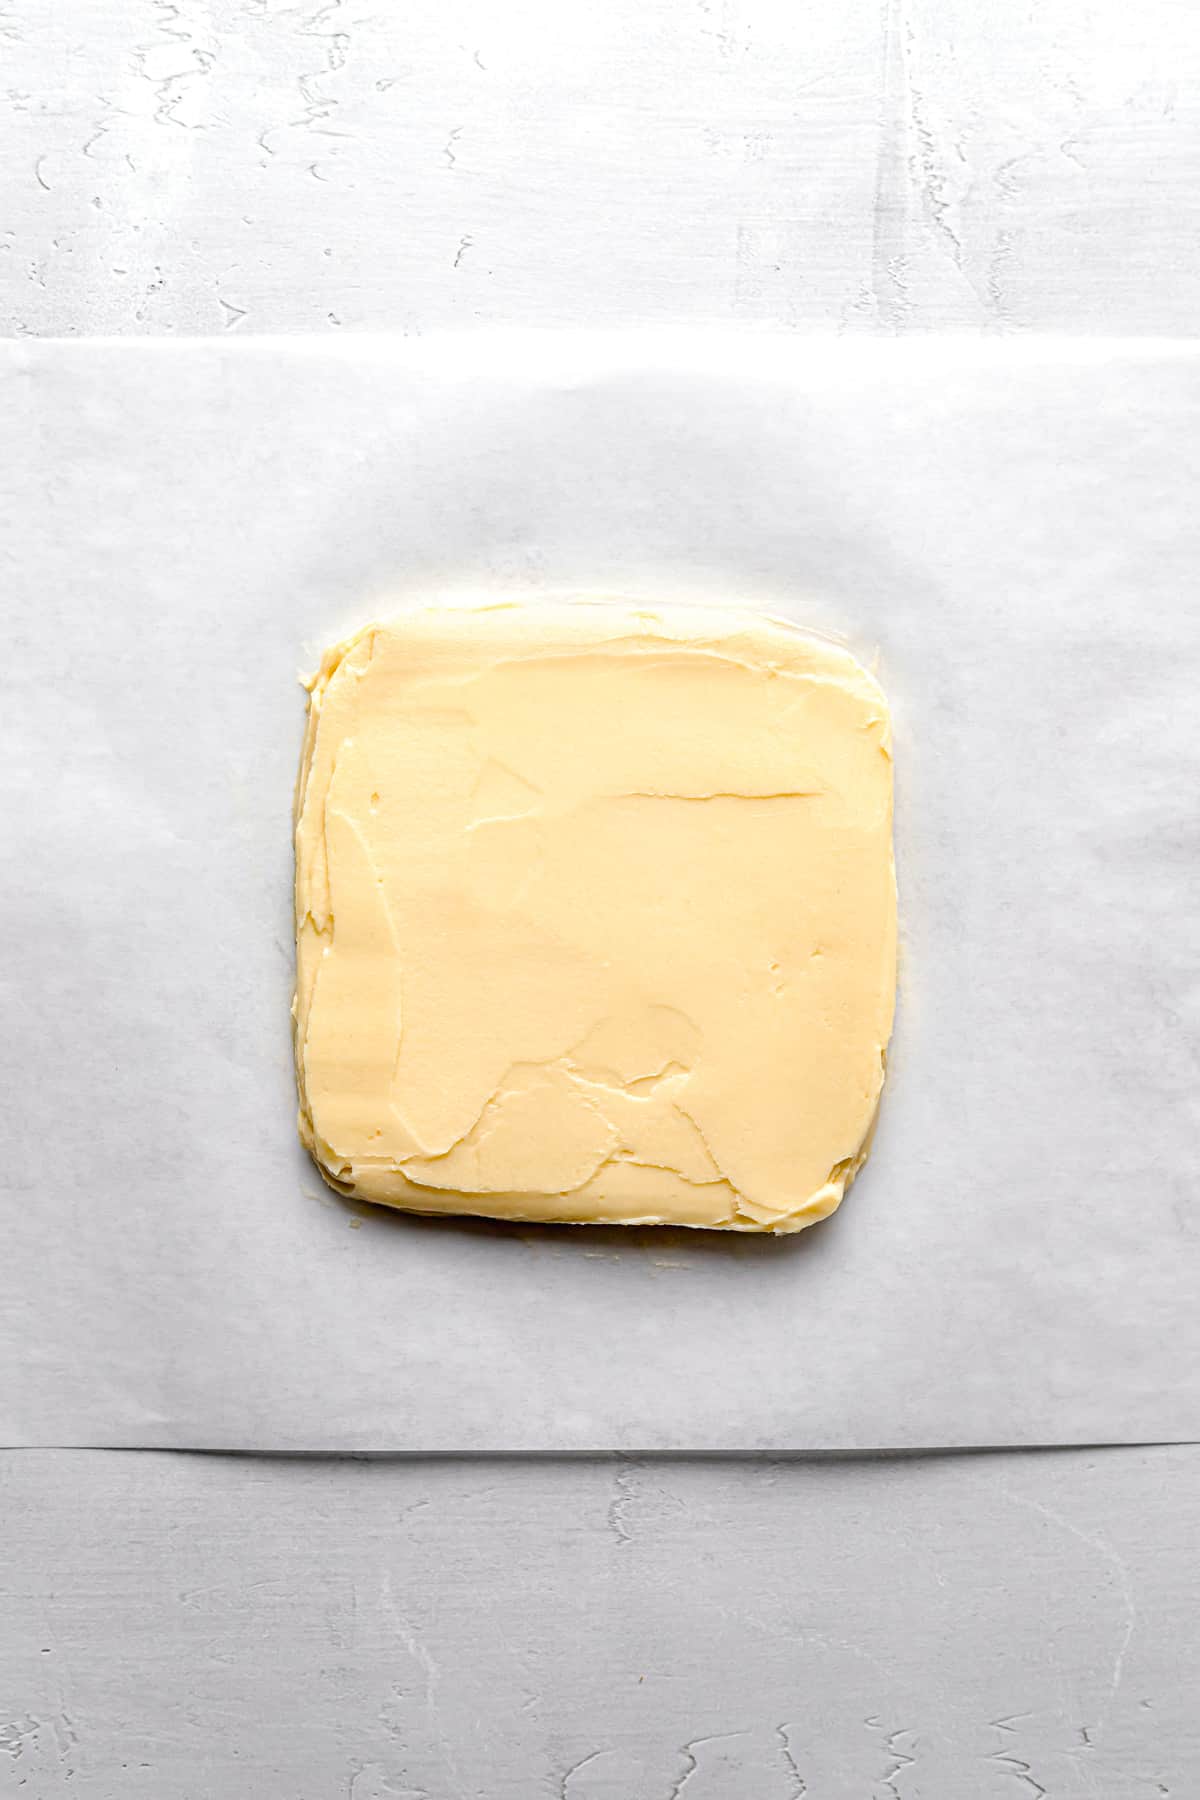 butter block shaped into square on parchment paper.